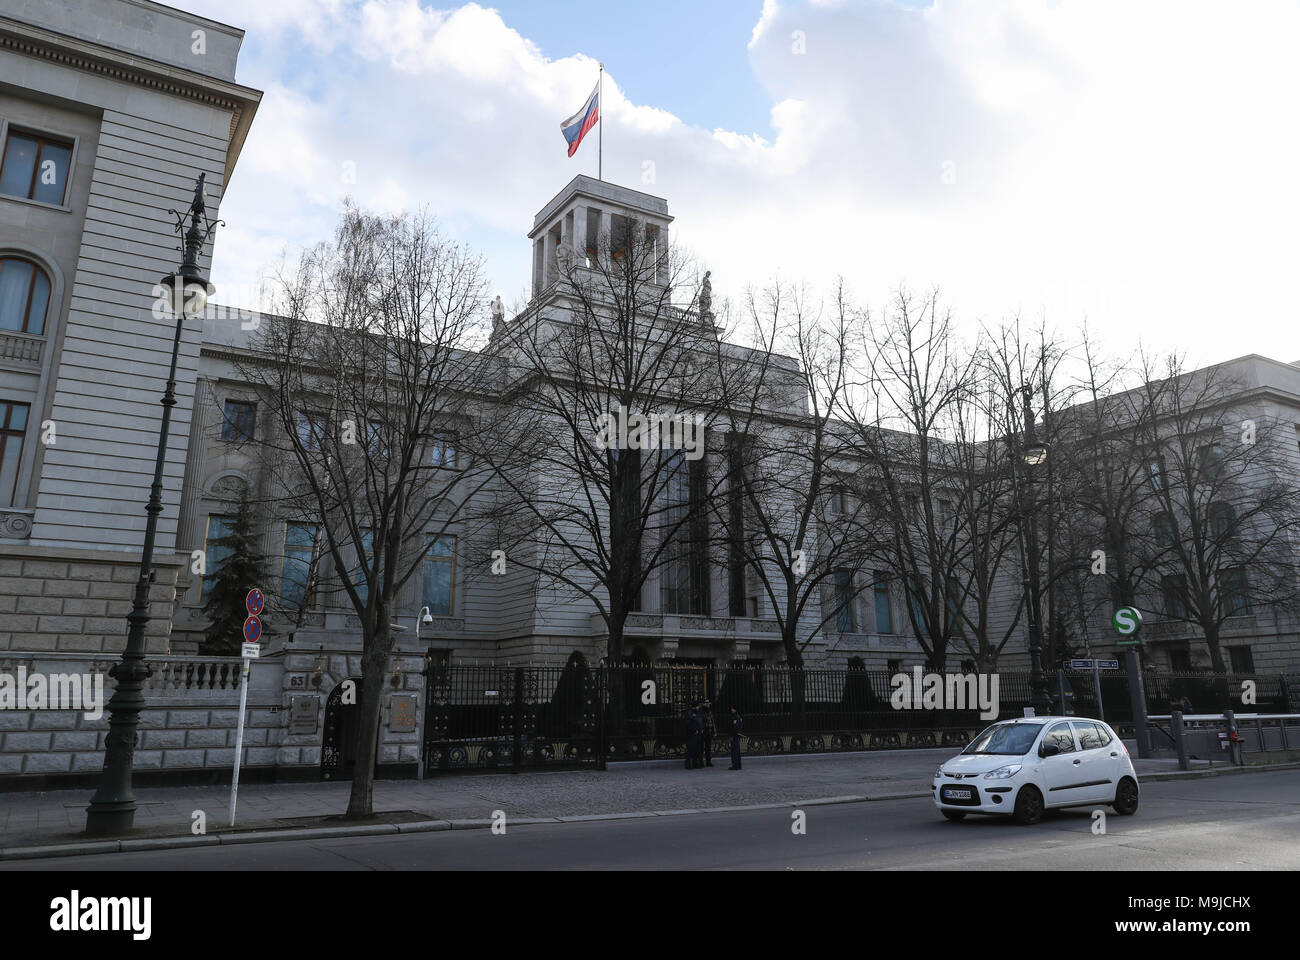 Berlin. 26th Mar, 2018. Photo taken on March 26, 2018 shows a view of Russian Embassy in Berlin, capital of Germany. Germany announced Monday that it will expel four Russian diplomats over the poisoning of former double agent Sergei Skripal and his daughter in Britain. Credit: Shan Yuqi/Xinhua/Alamy Live News Stock Photo